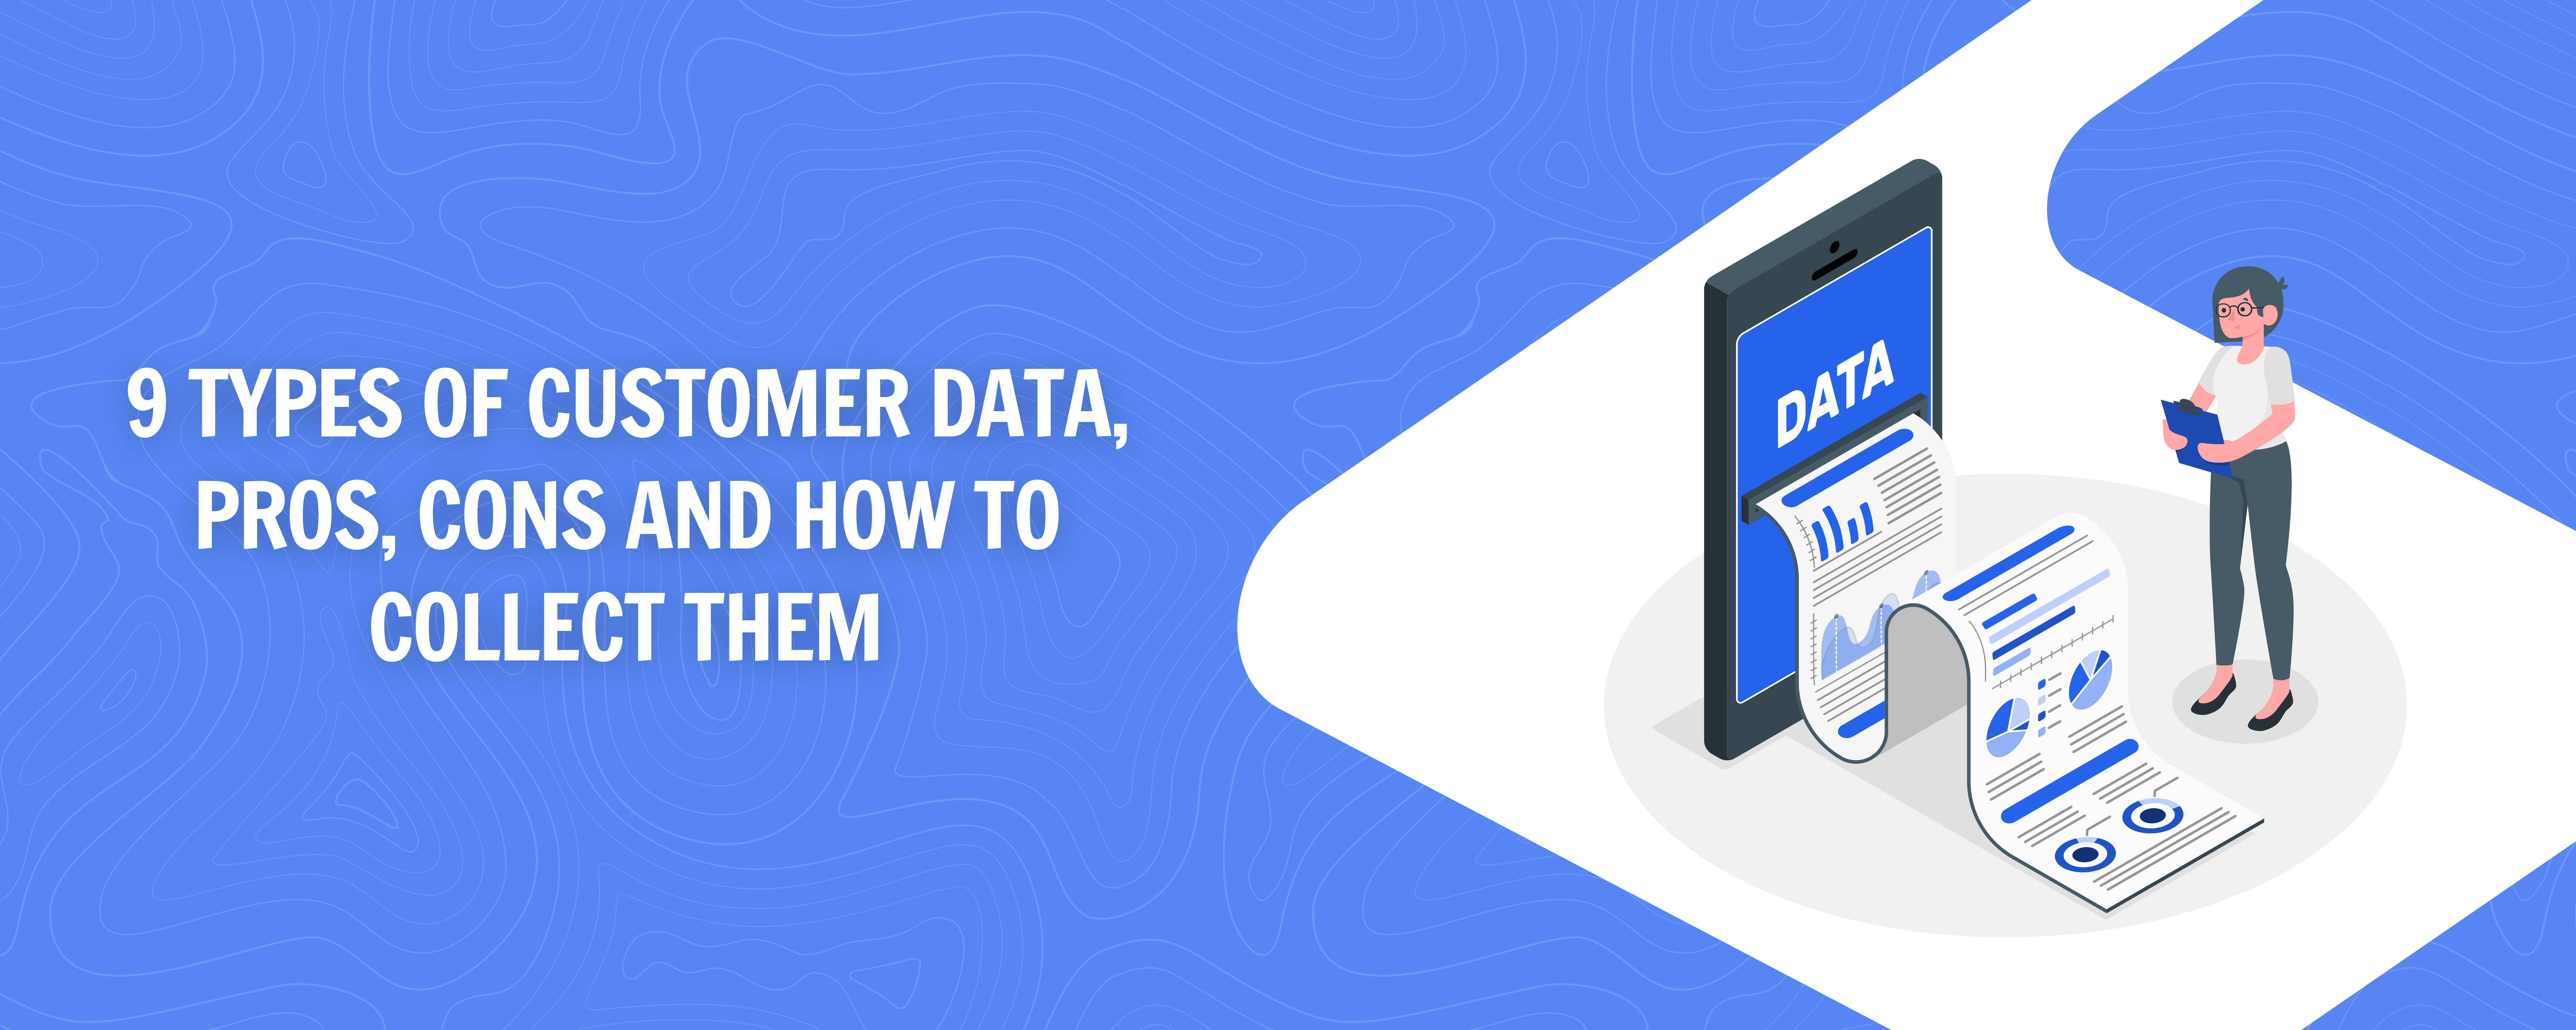 9 Types of Customer Data | Pros, Cons and How to collect